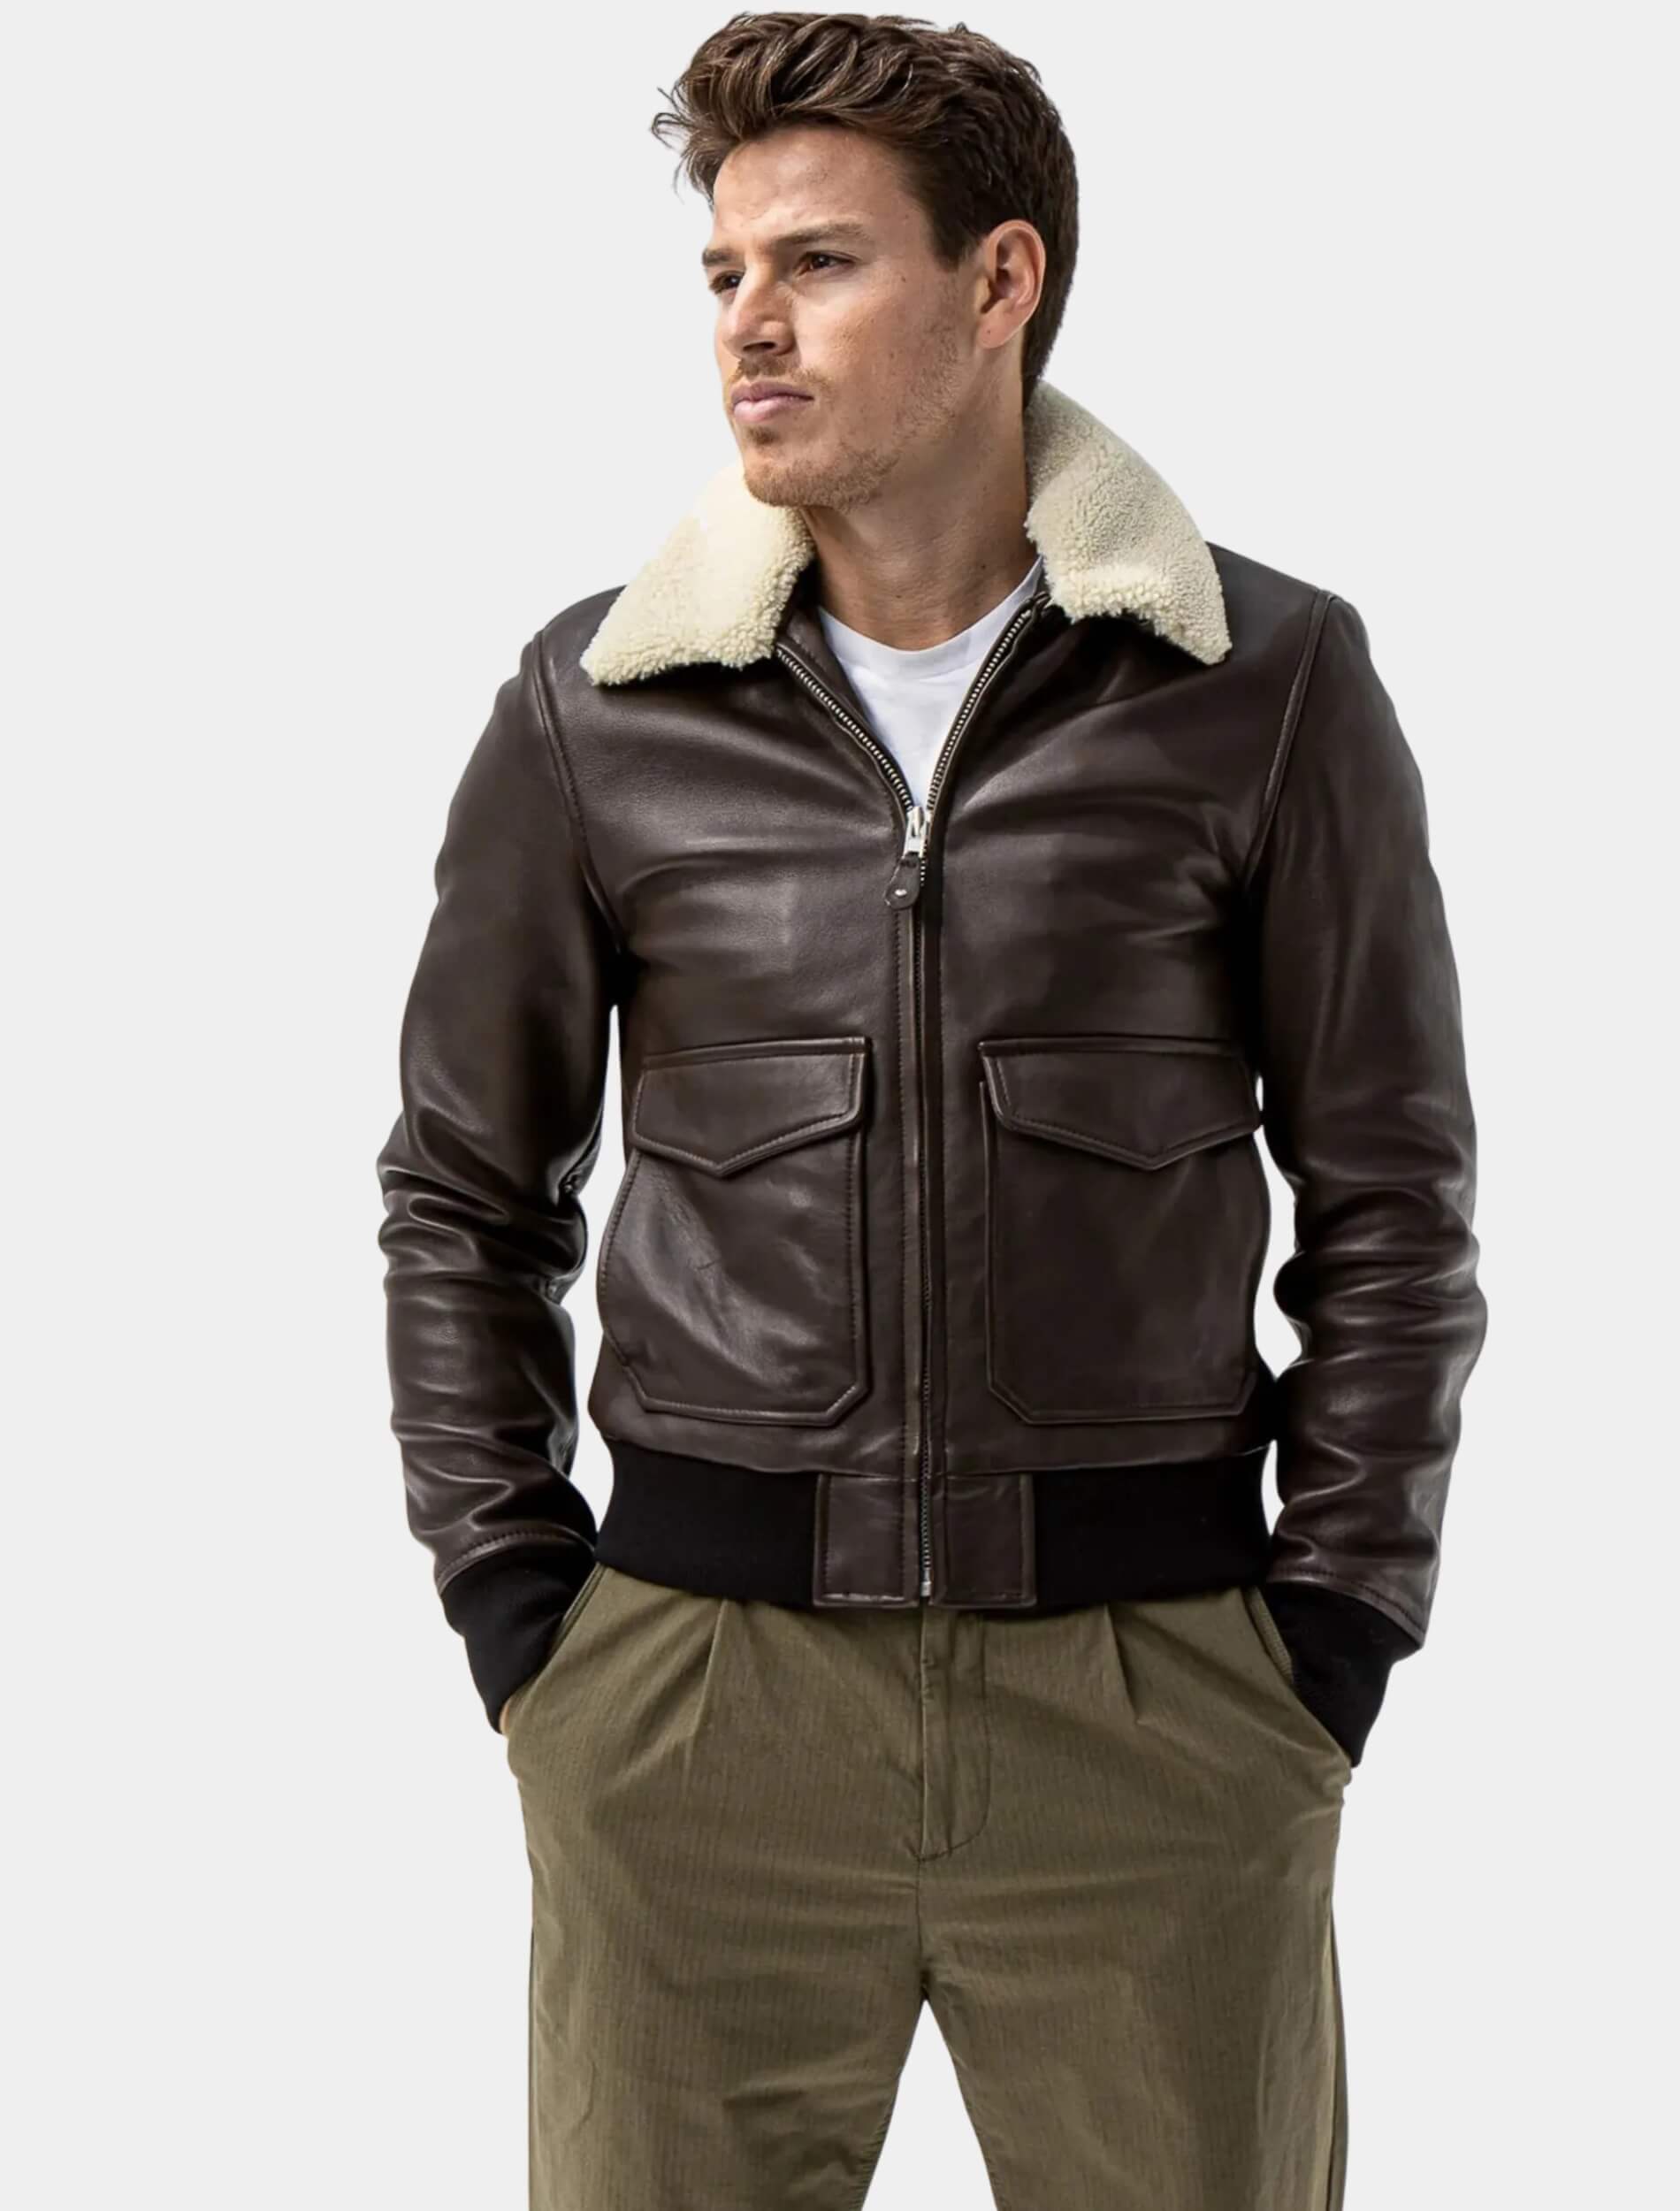 Levi Beige Brown Leather Jacket With Shearling Collar